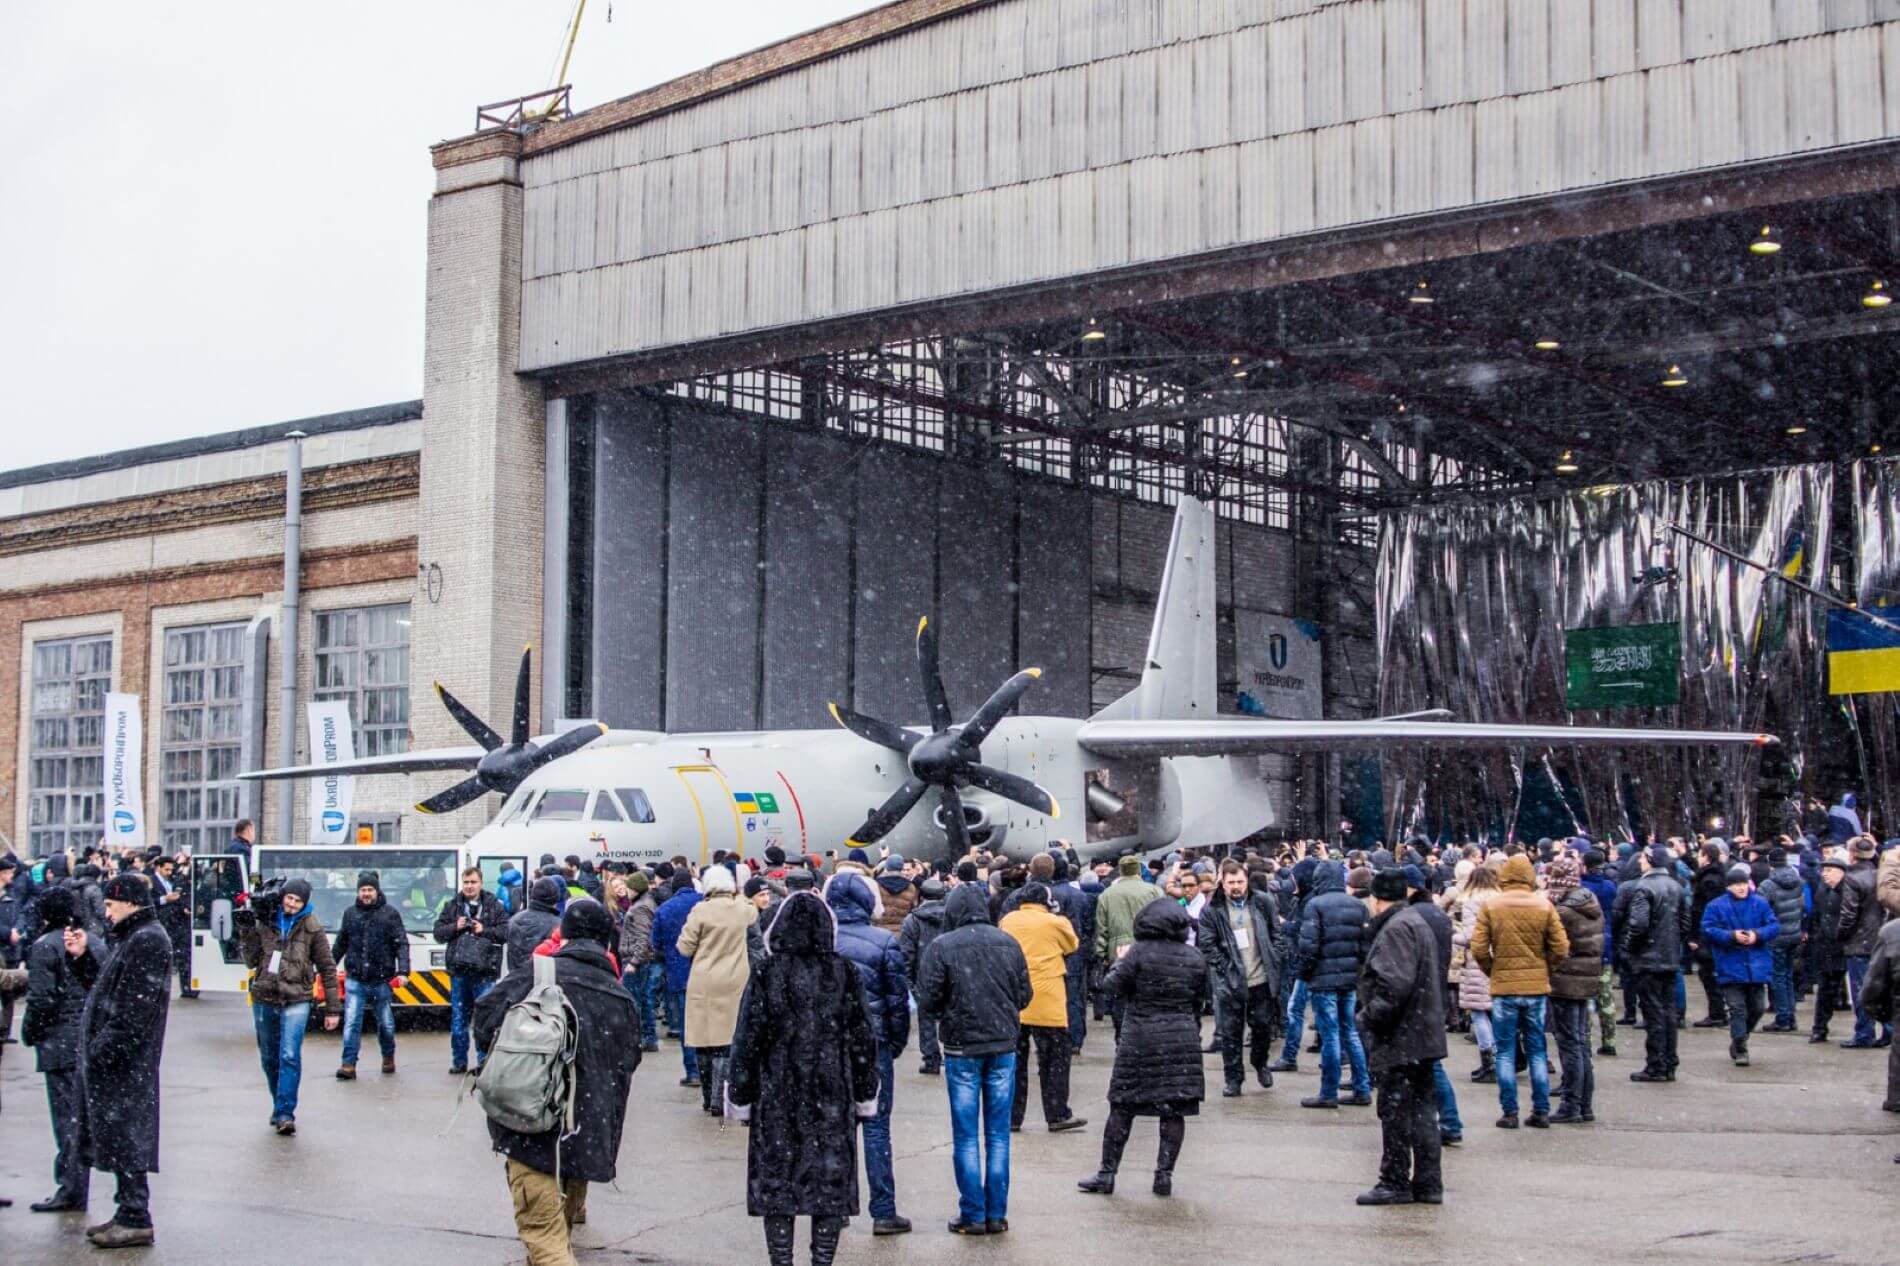 An-132 rollout